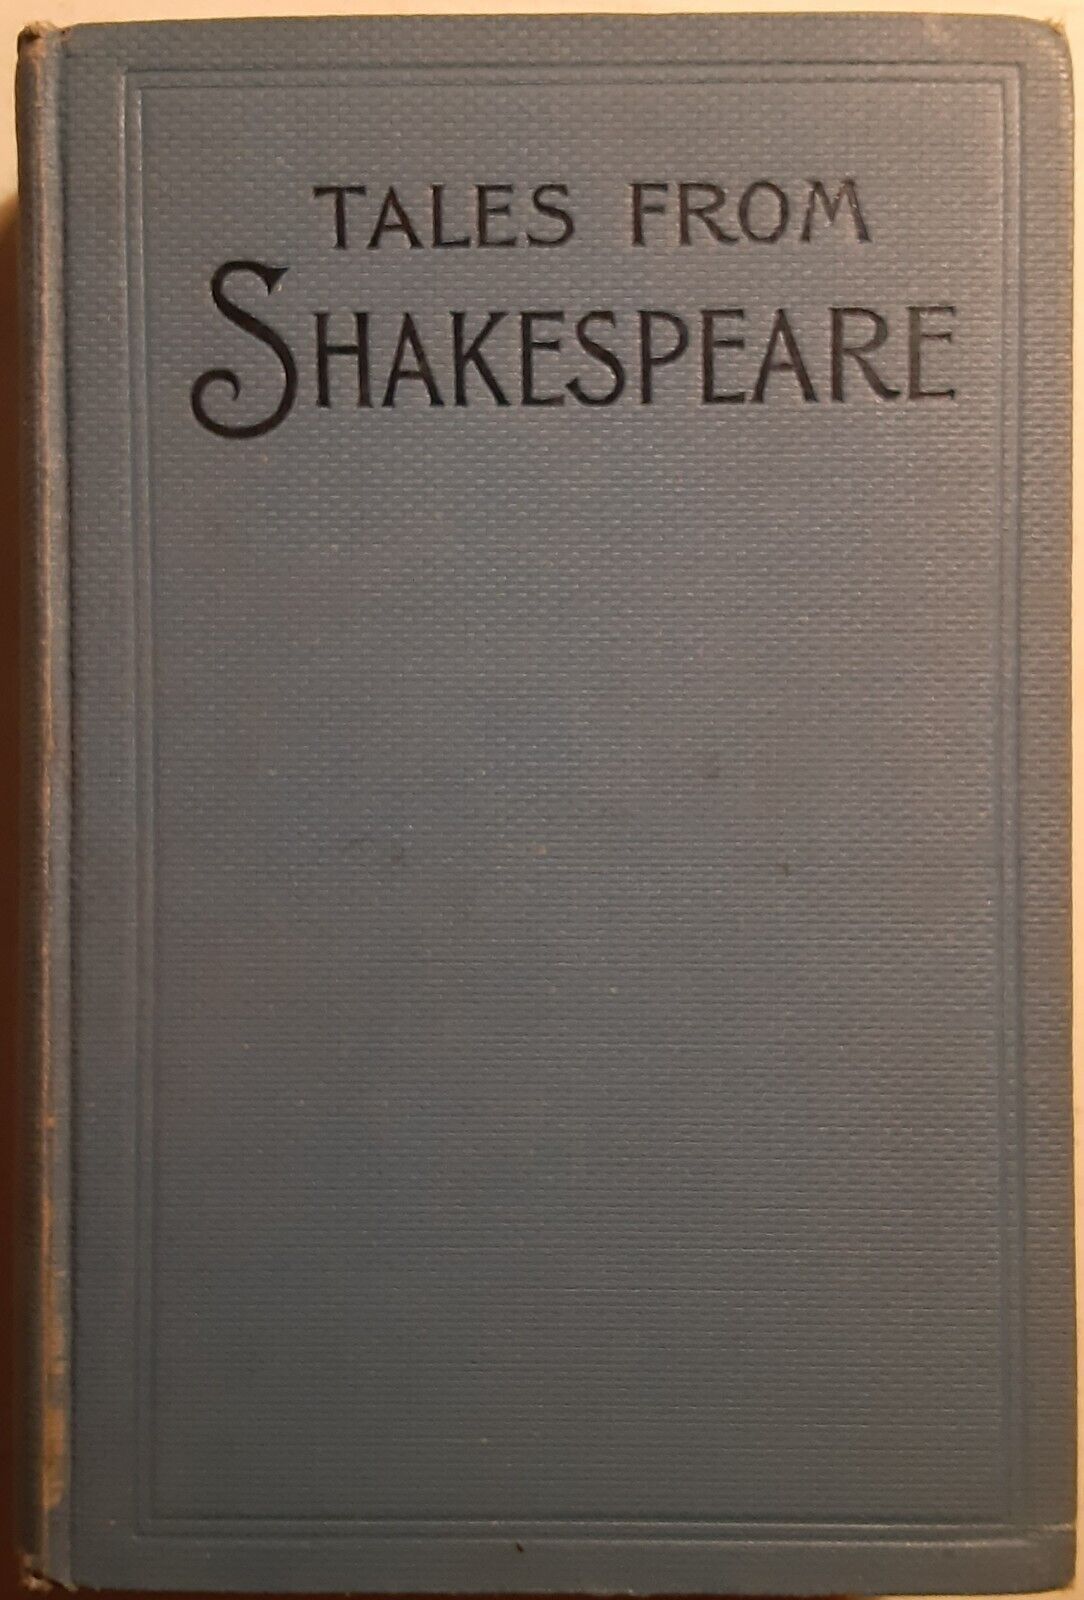 Tales From Shakespeare Hardcover Book 353 Pages 